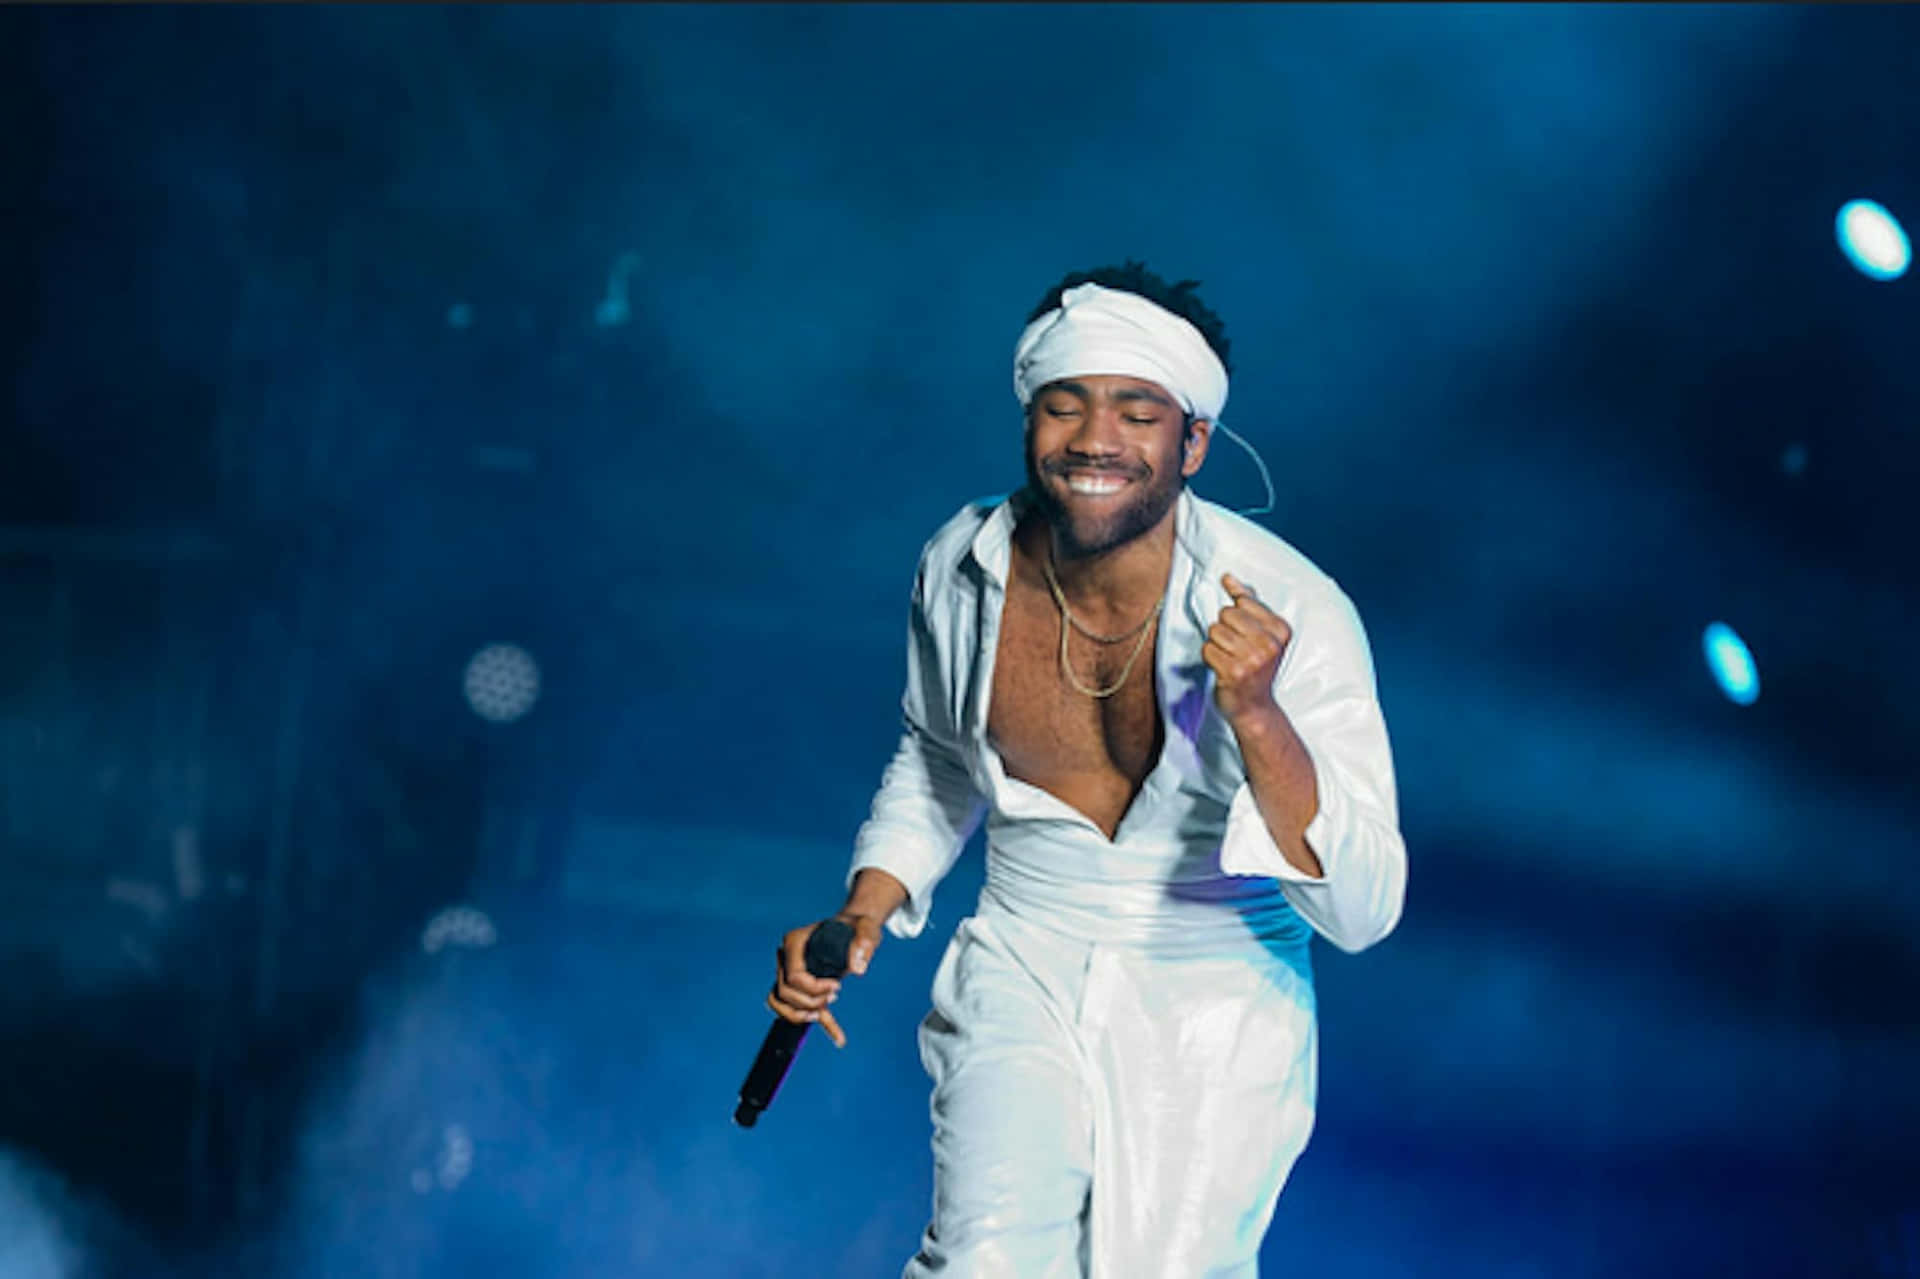 Childish Gambino Performing Livein White Outfit Background